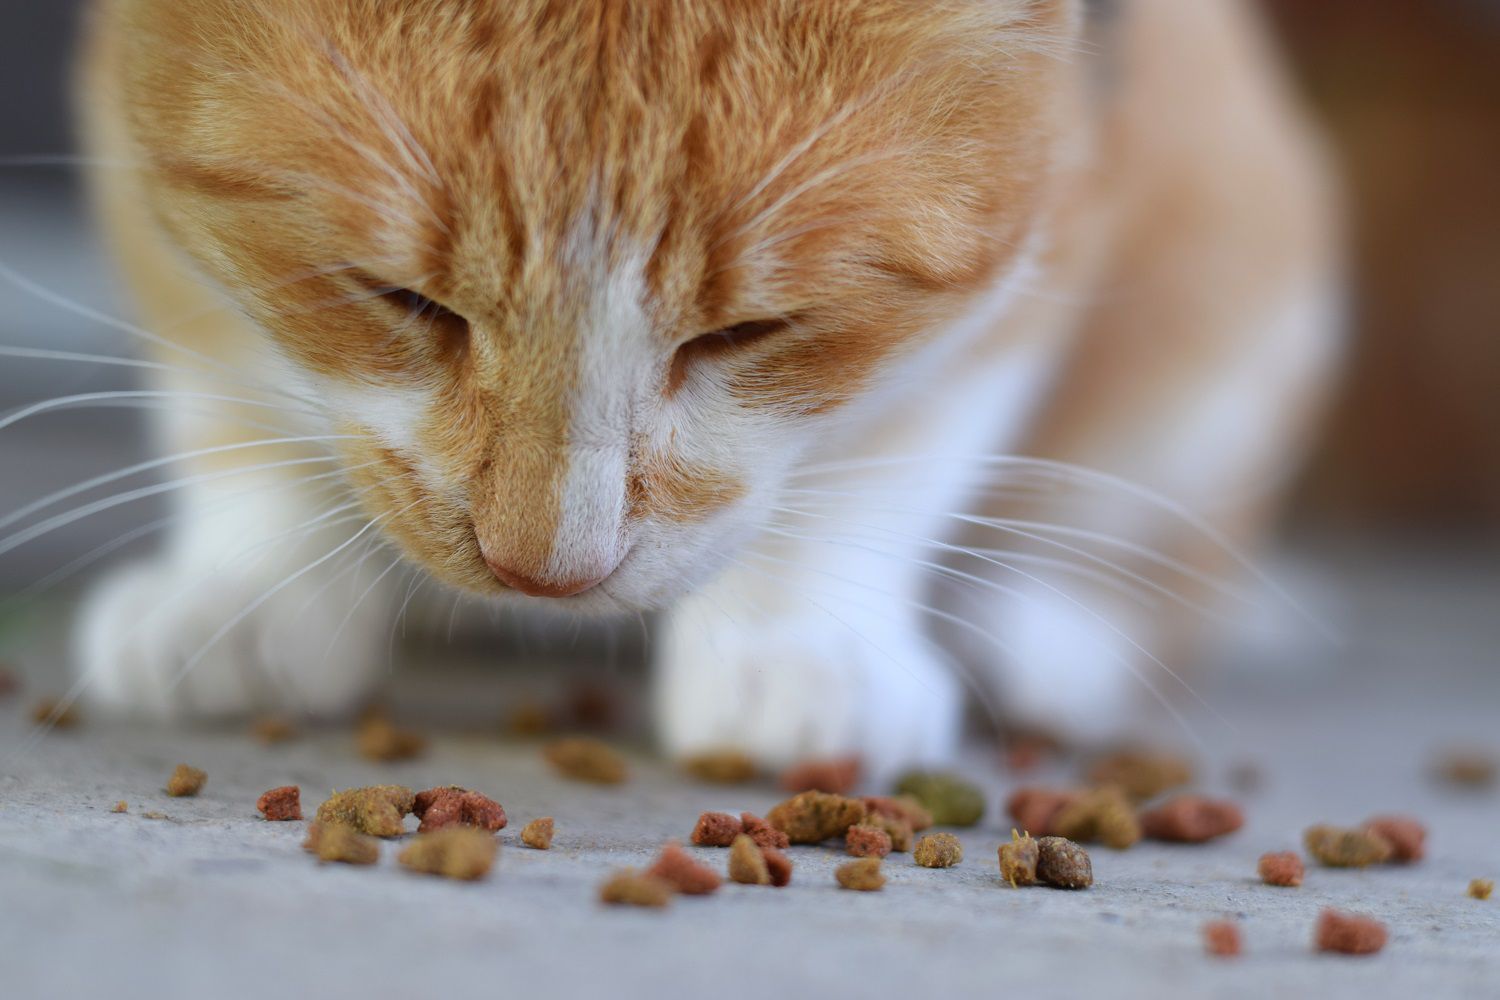 Cat eating food scattered on floor